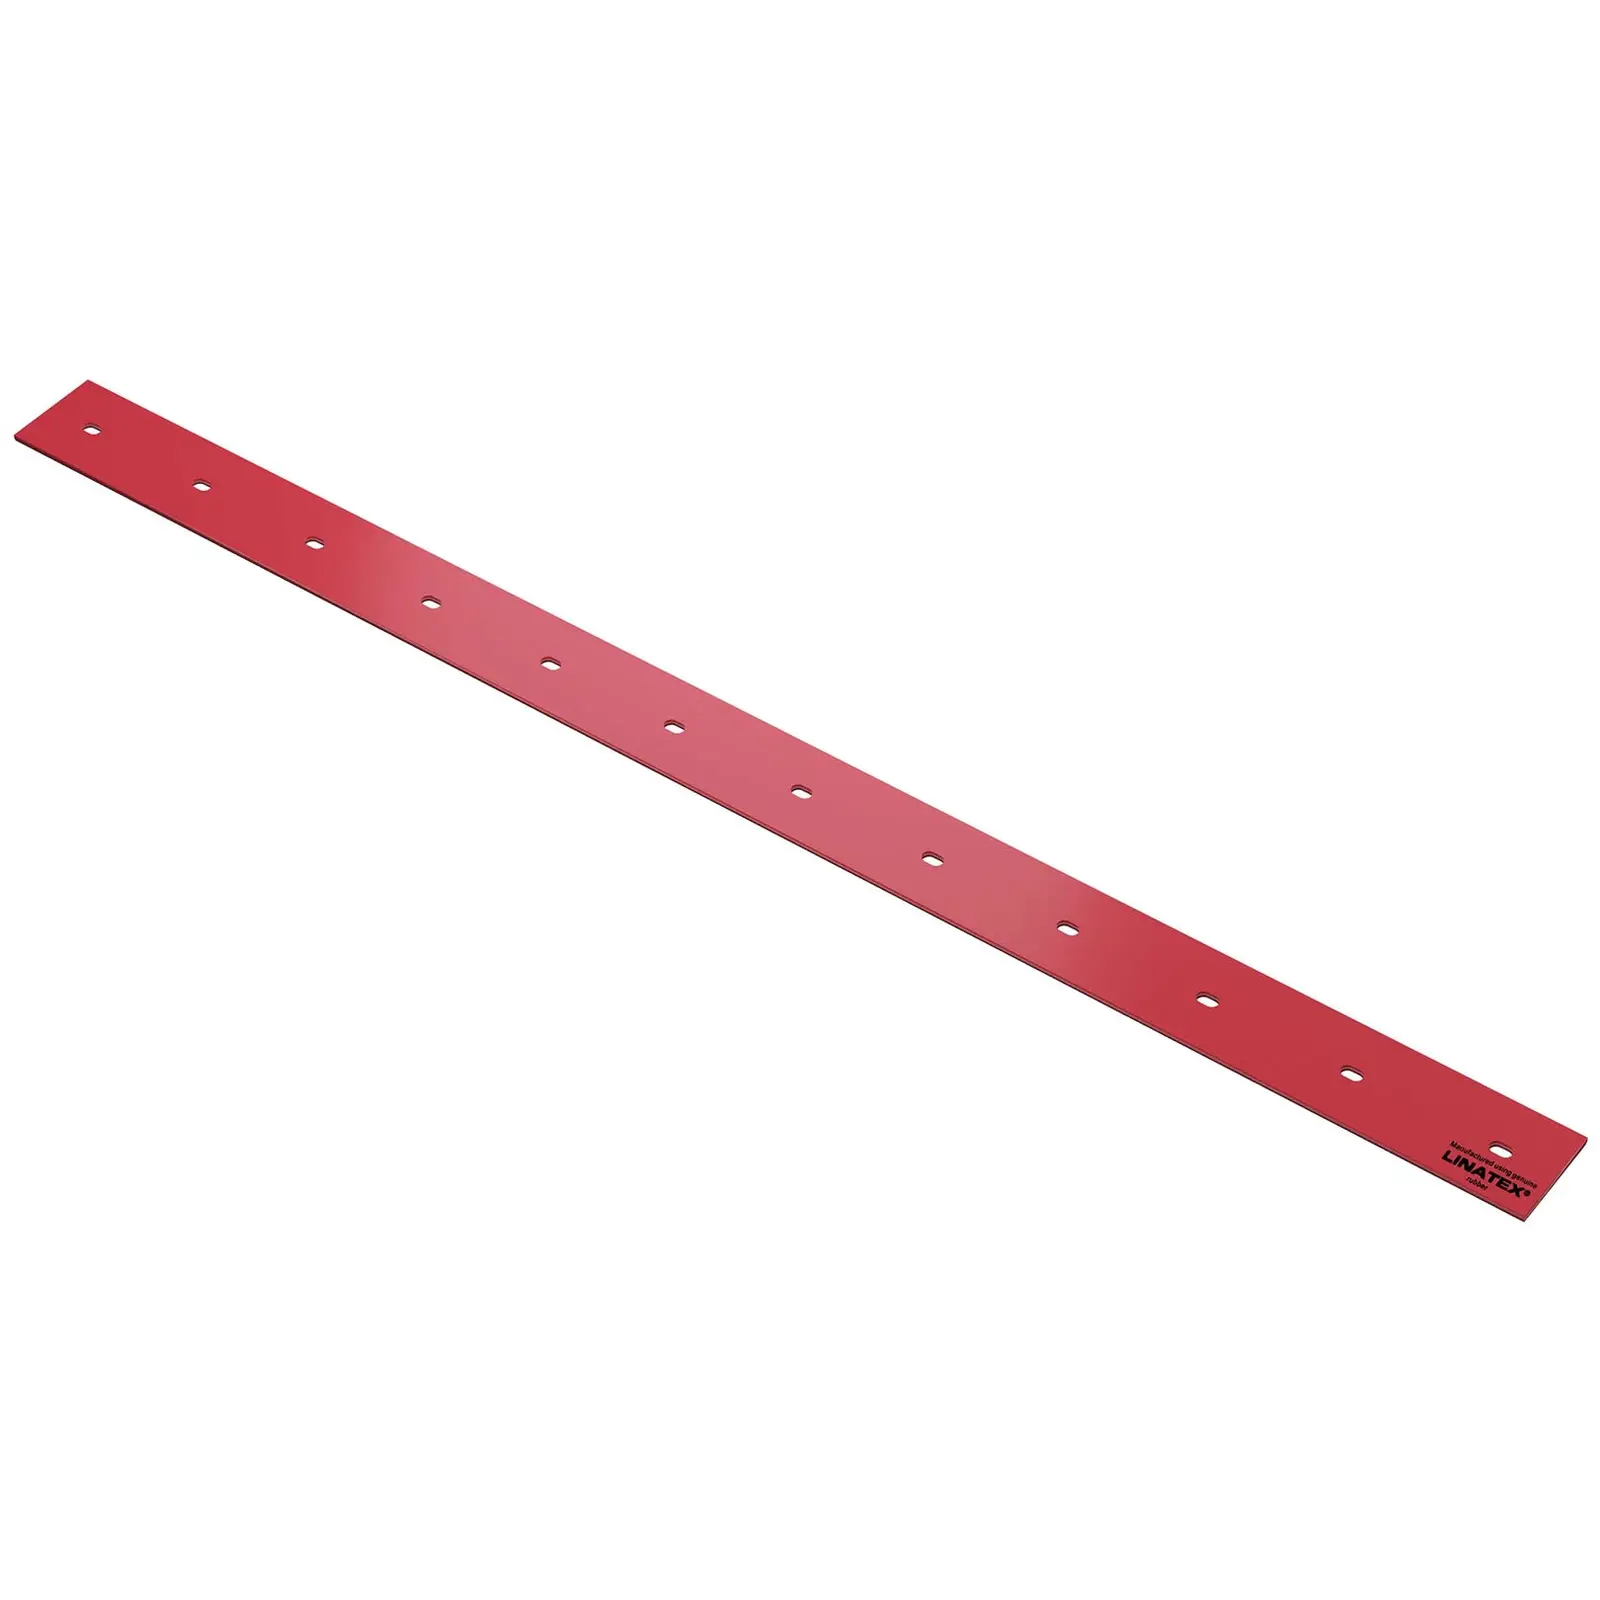 Rubber Rear Squeegee for TOPCLEAN 950 and TOPCLEAN 1600